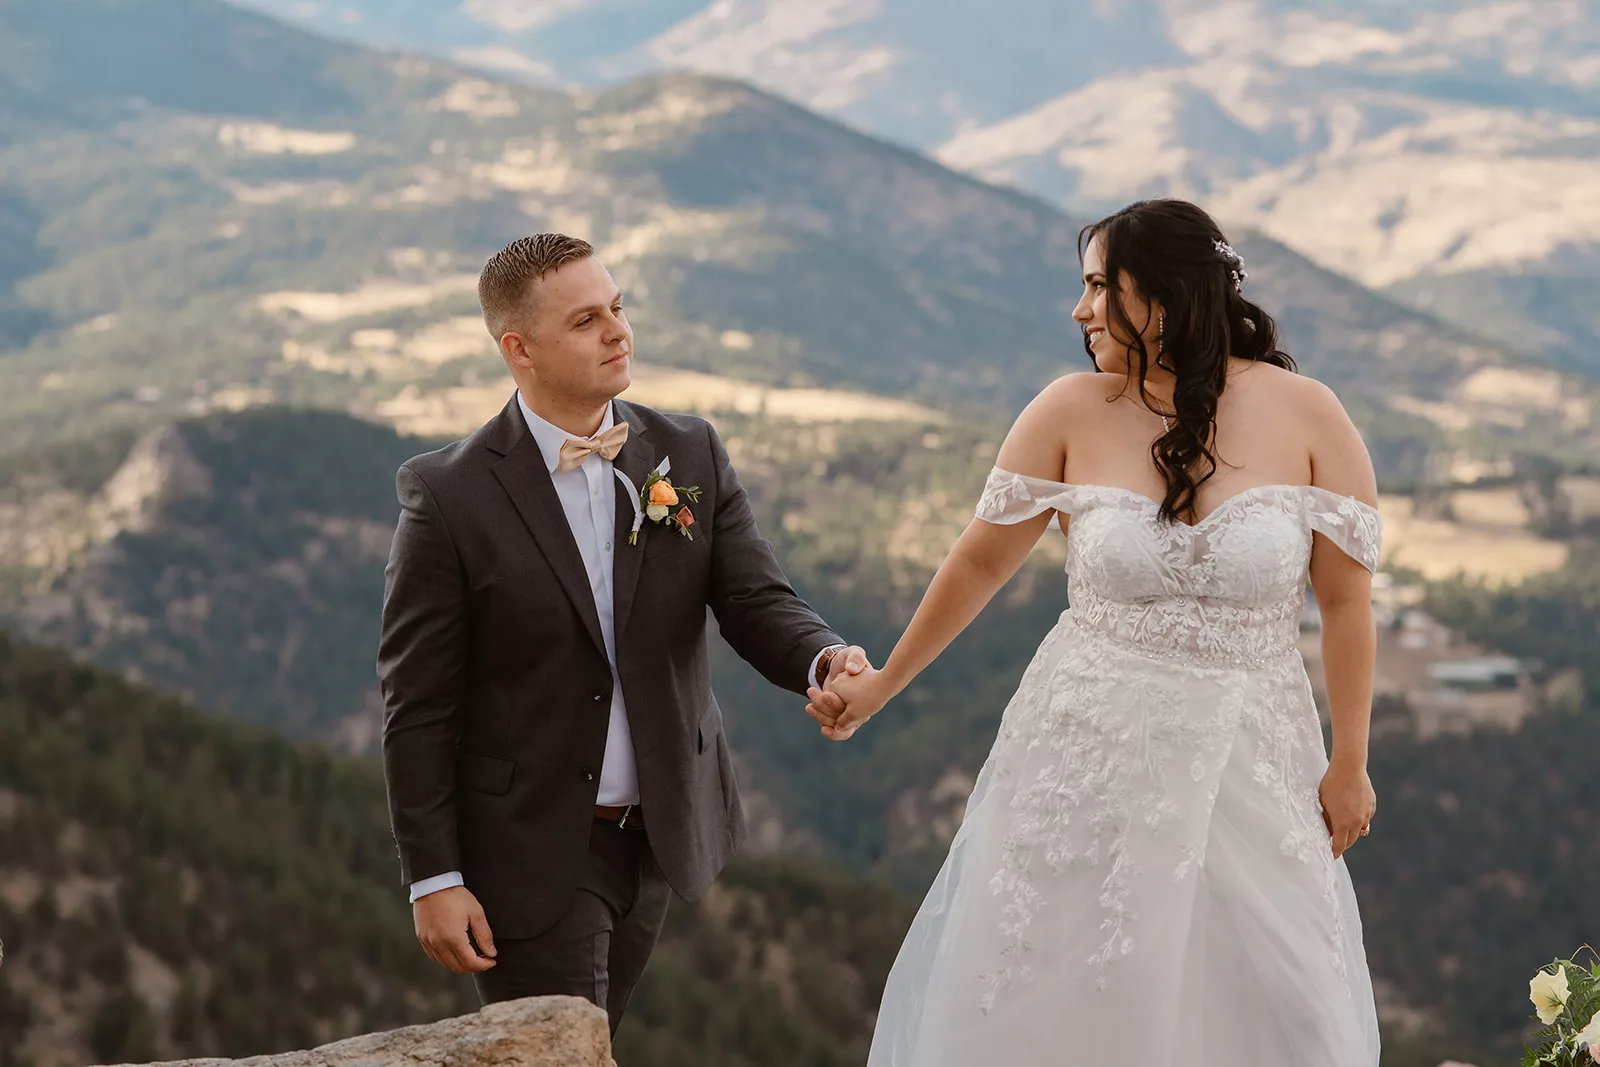 A bride and groom soak in the views around them during their adventure elopement in Colorado.